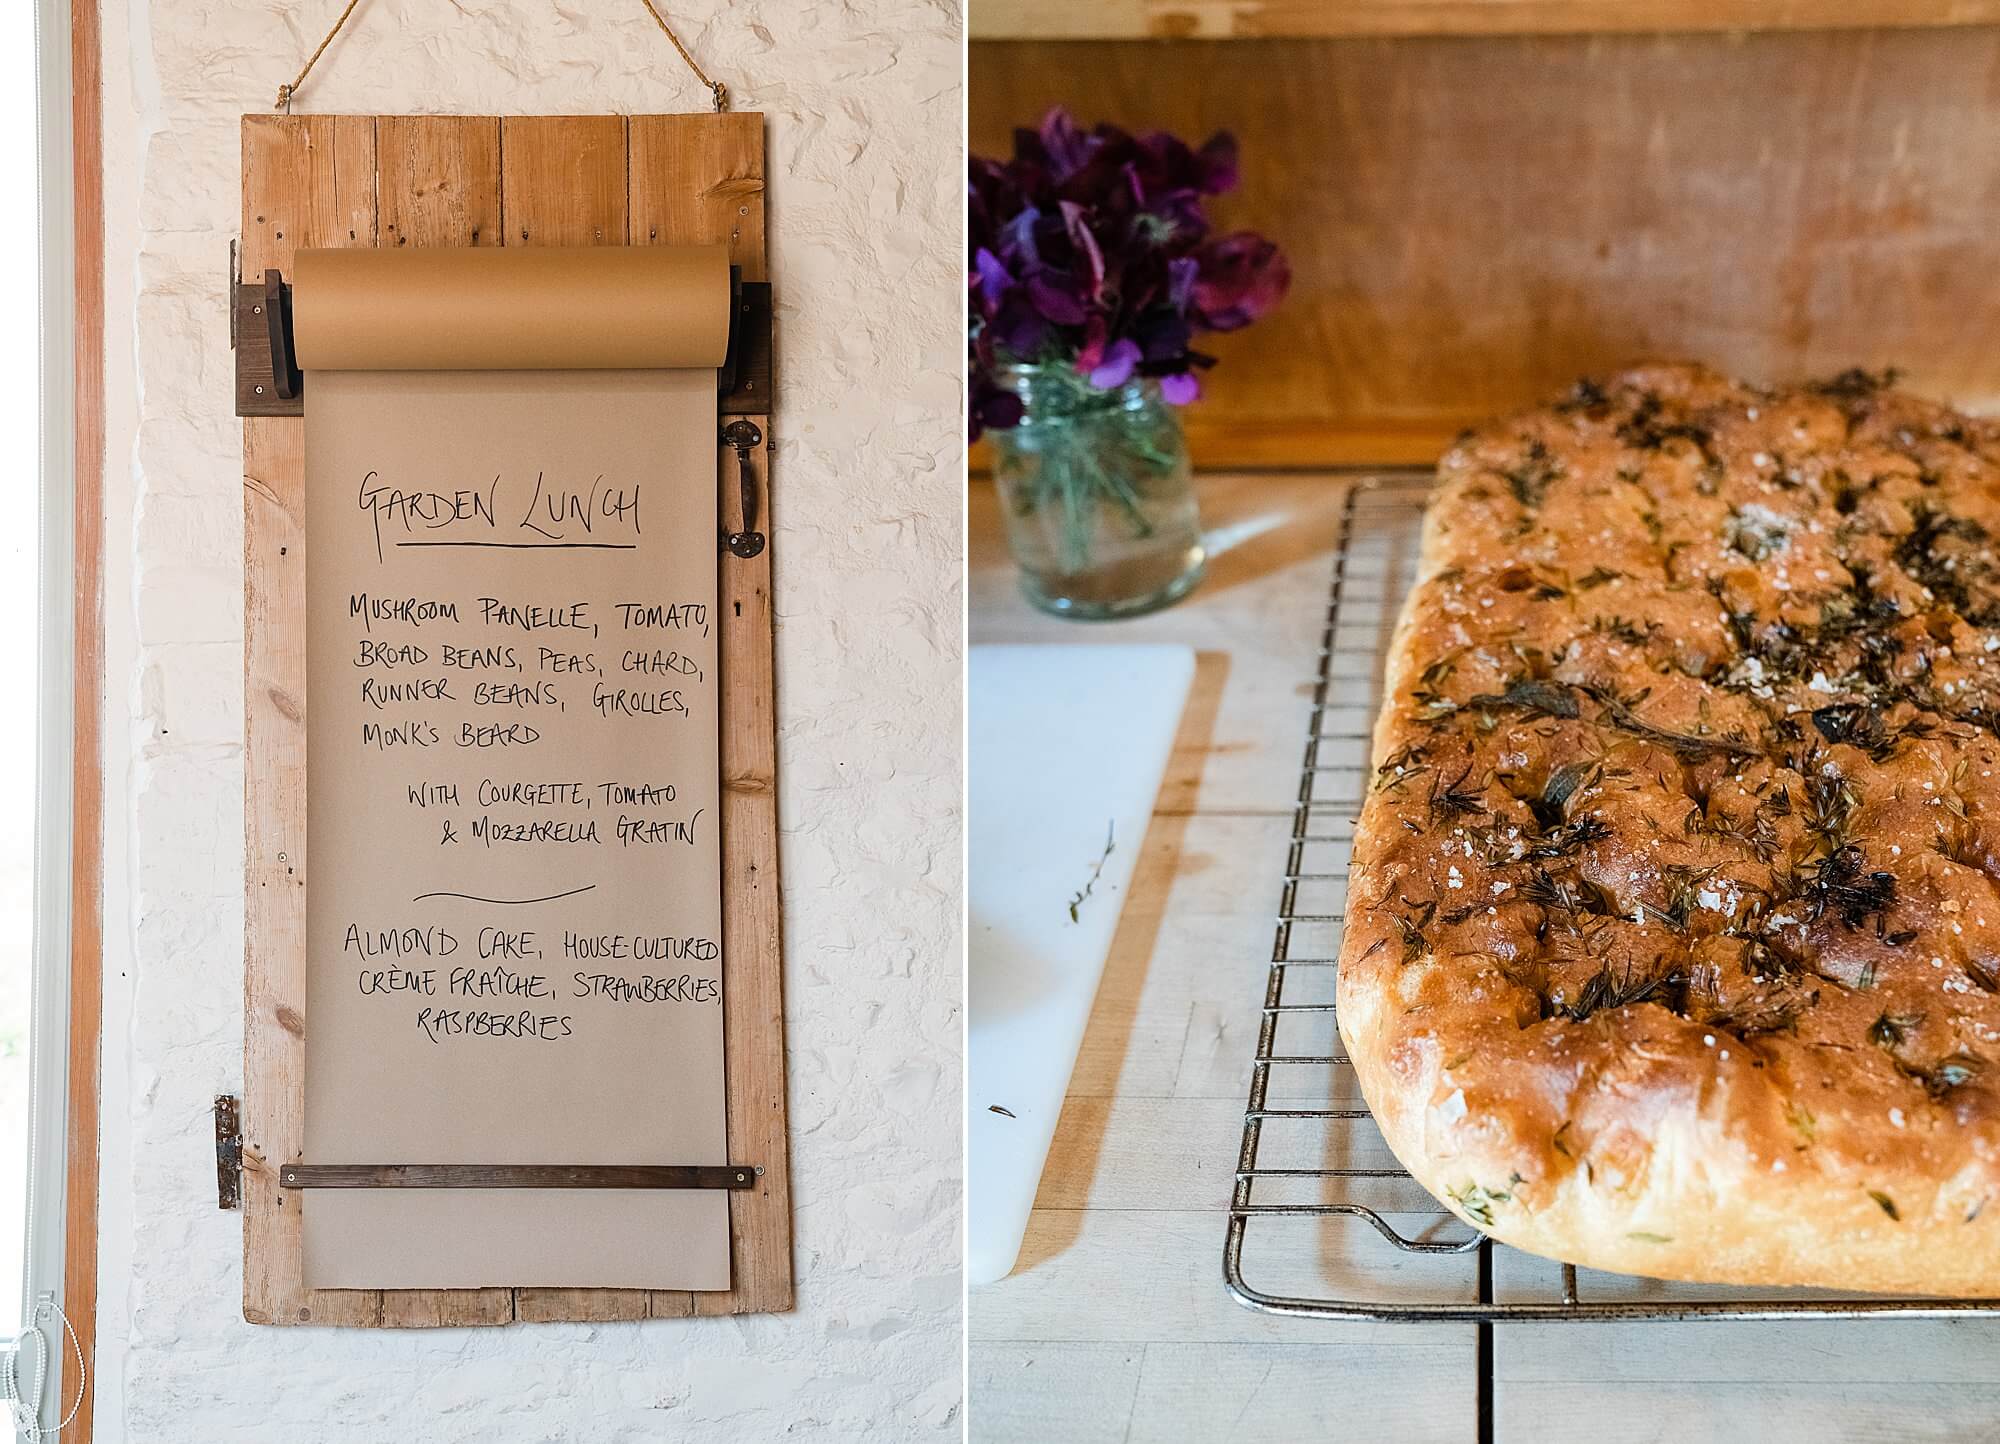 focaccia and lunch menu at river cottage hq dining